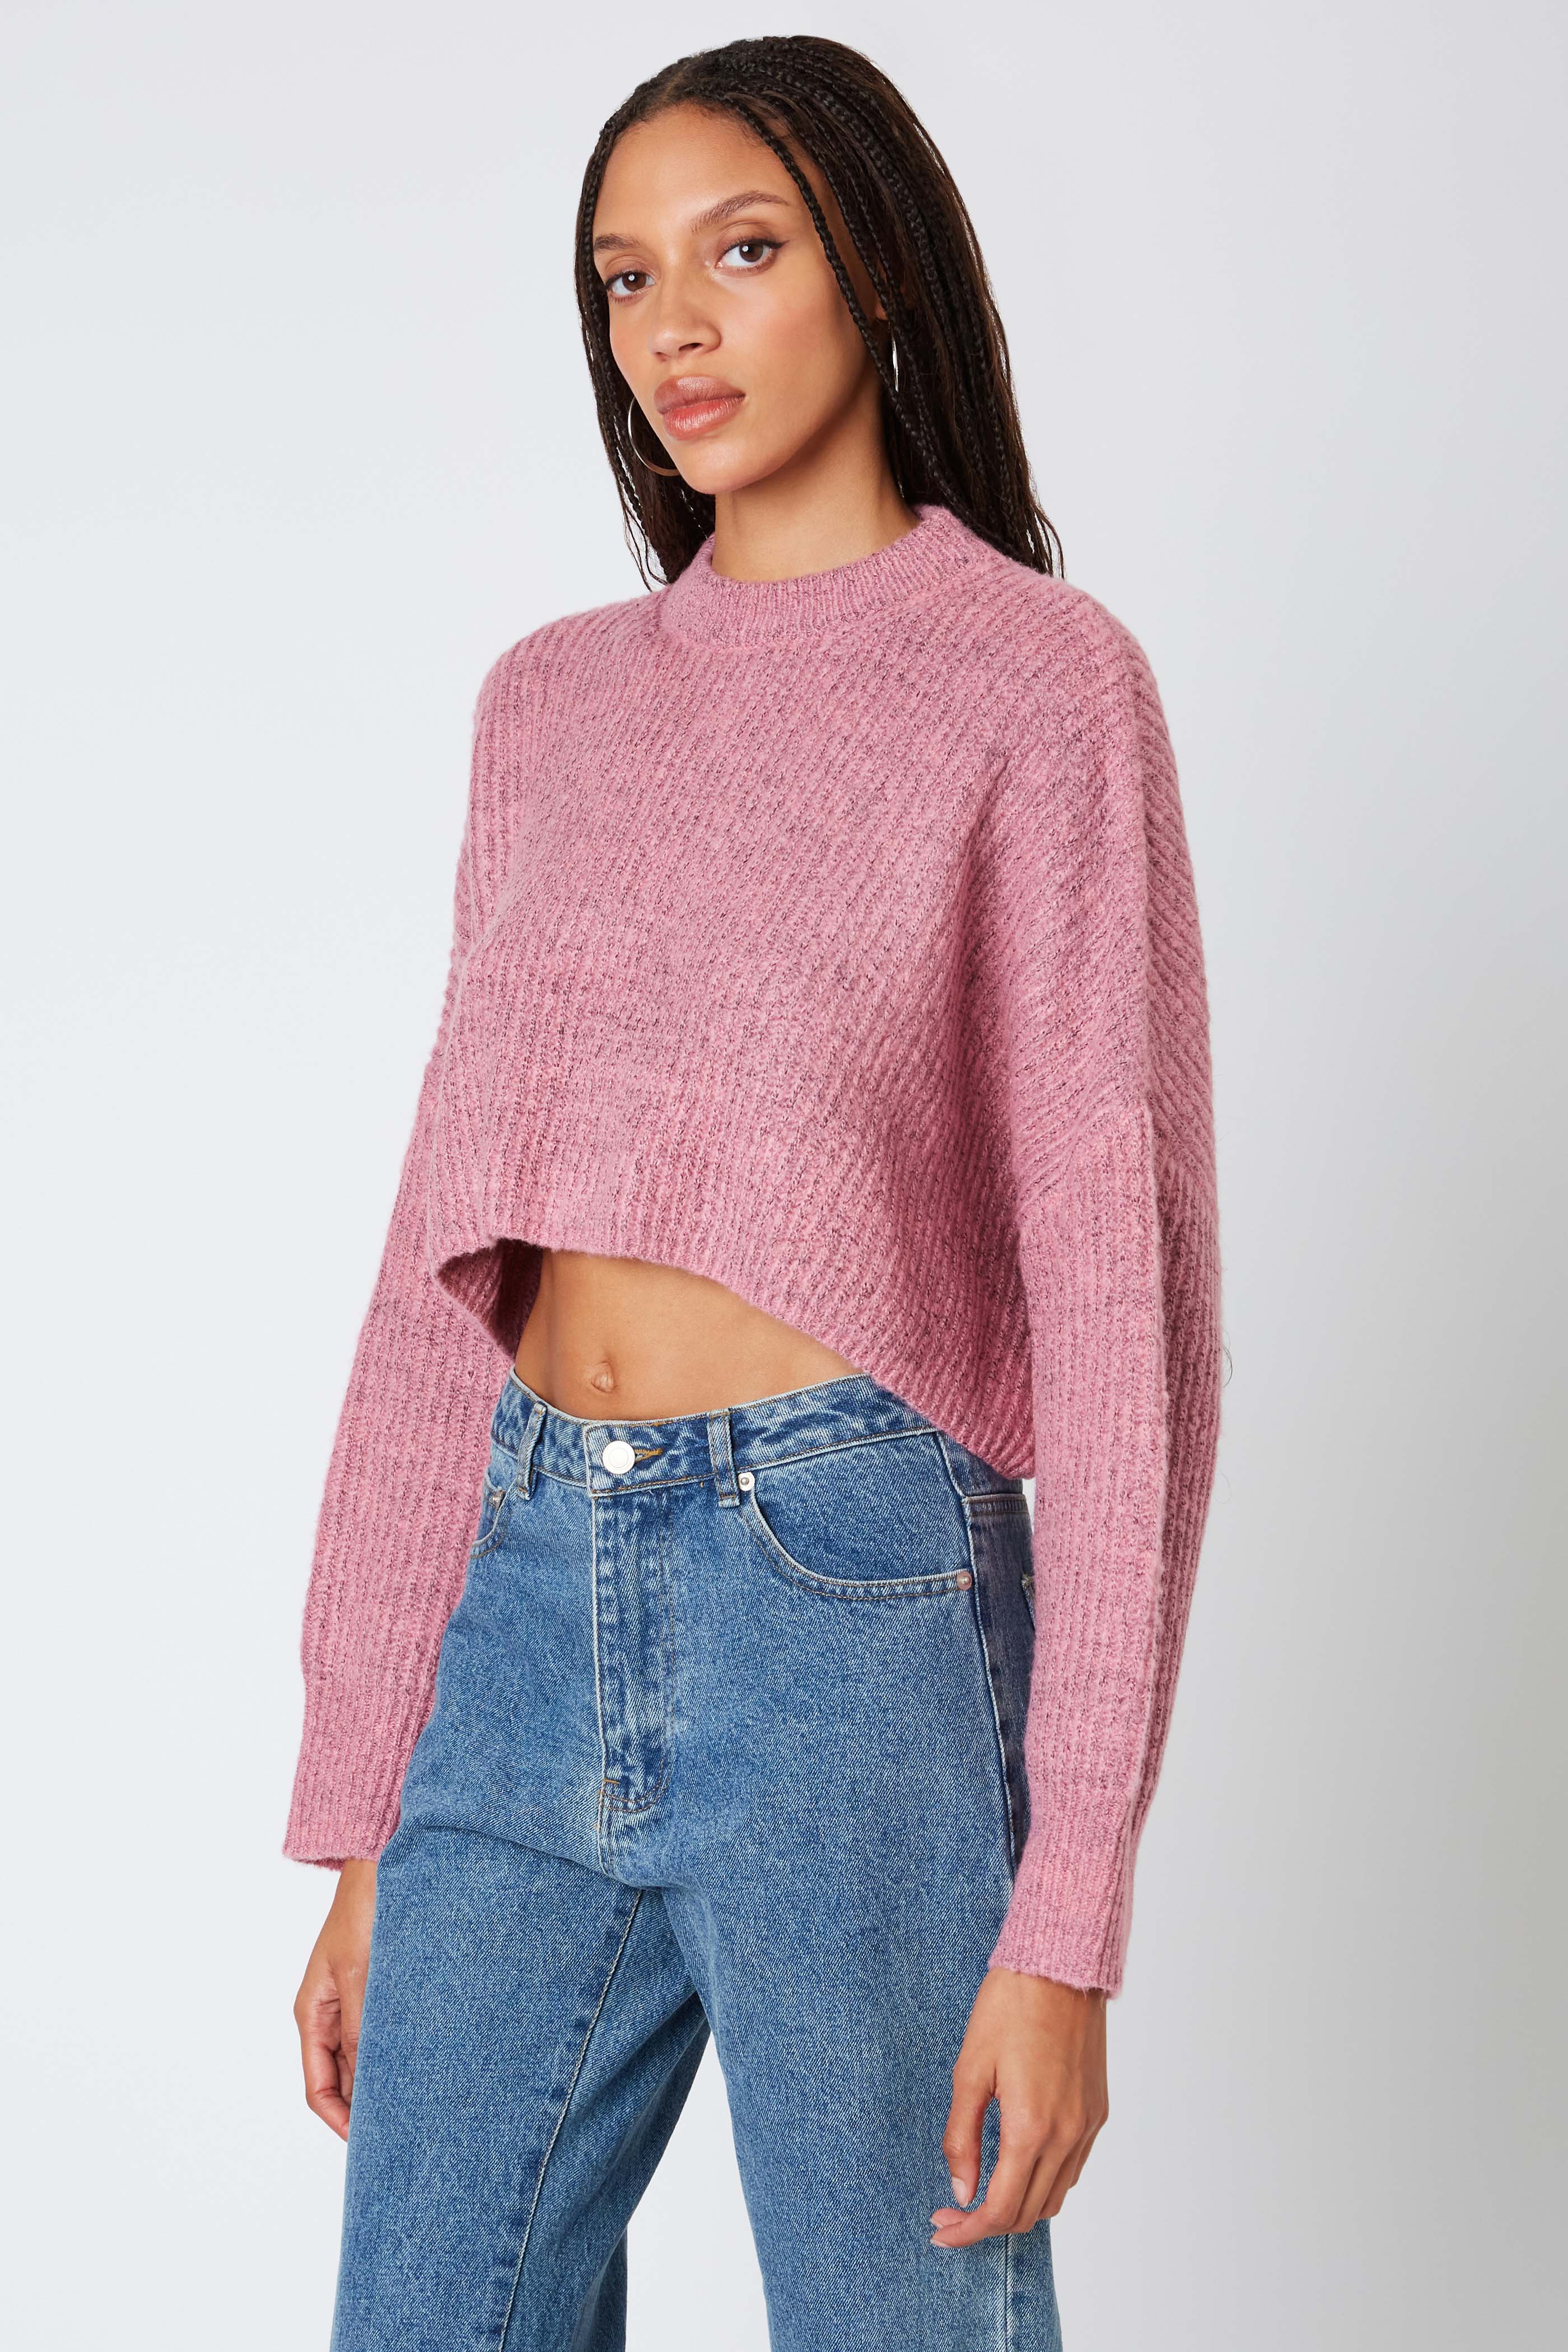 Cropped Mockneck Sweater in Pink Side View